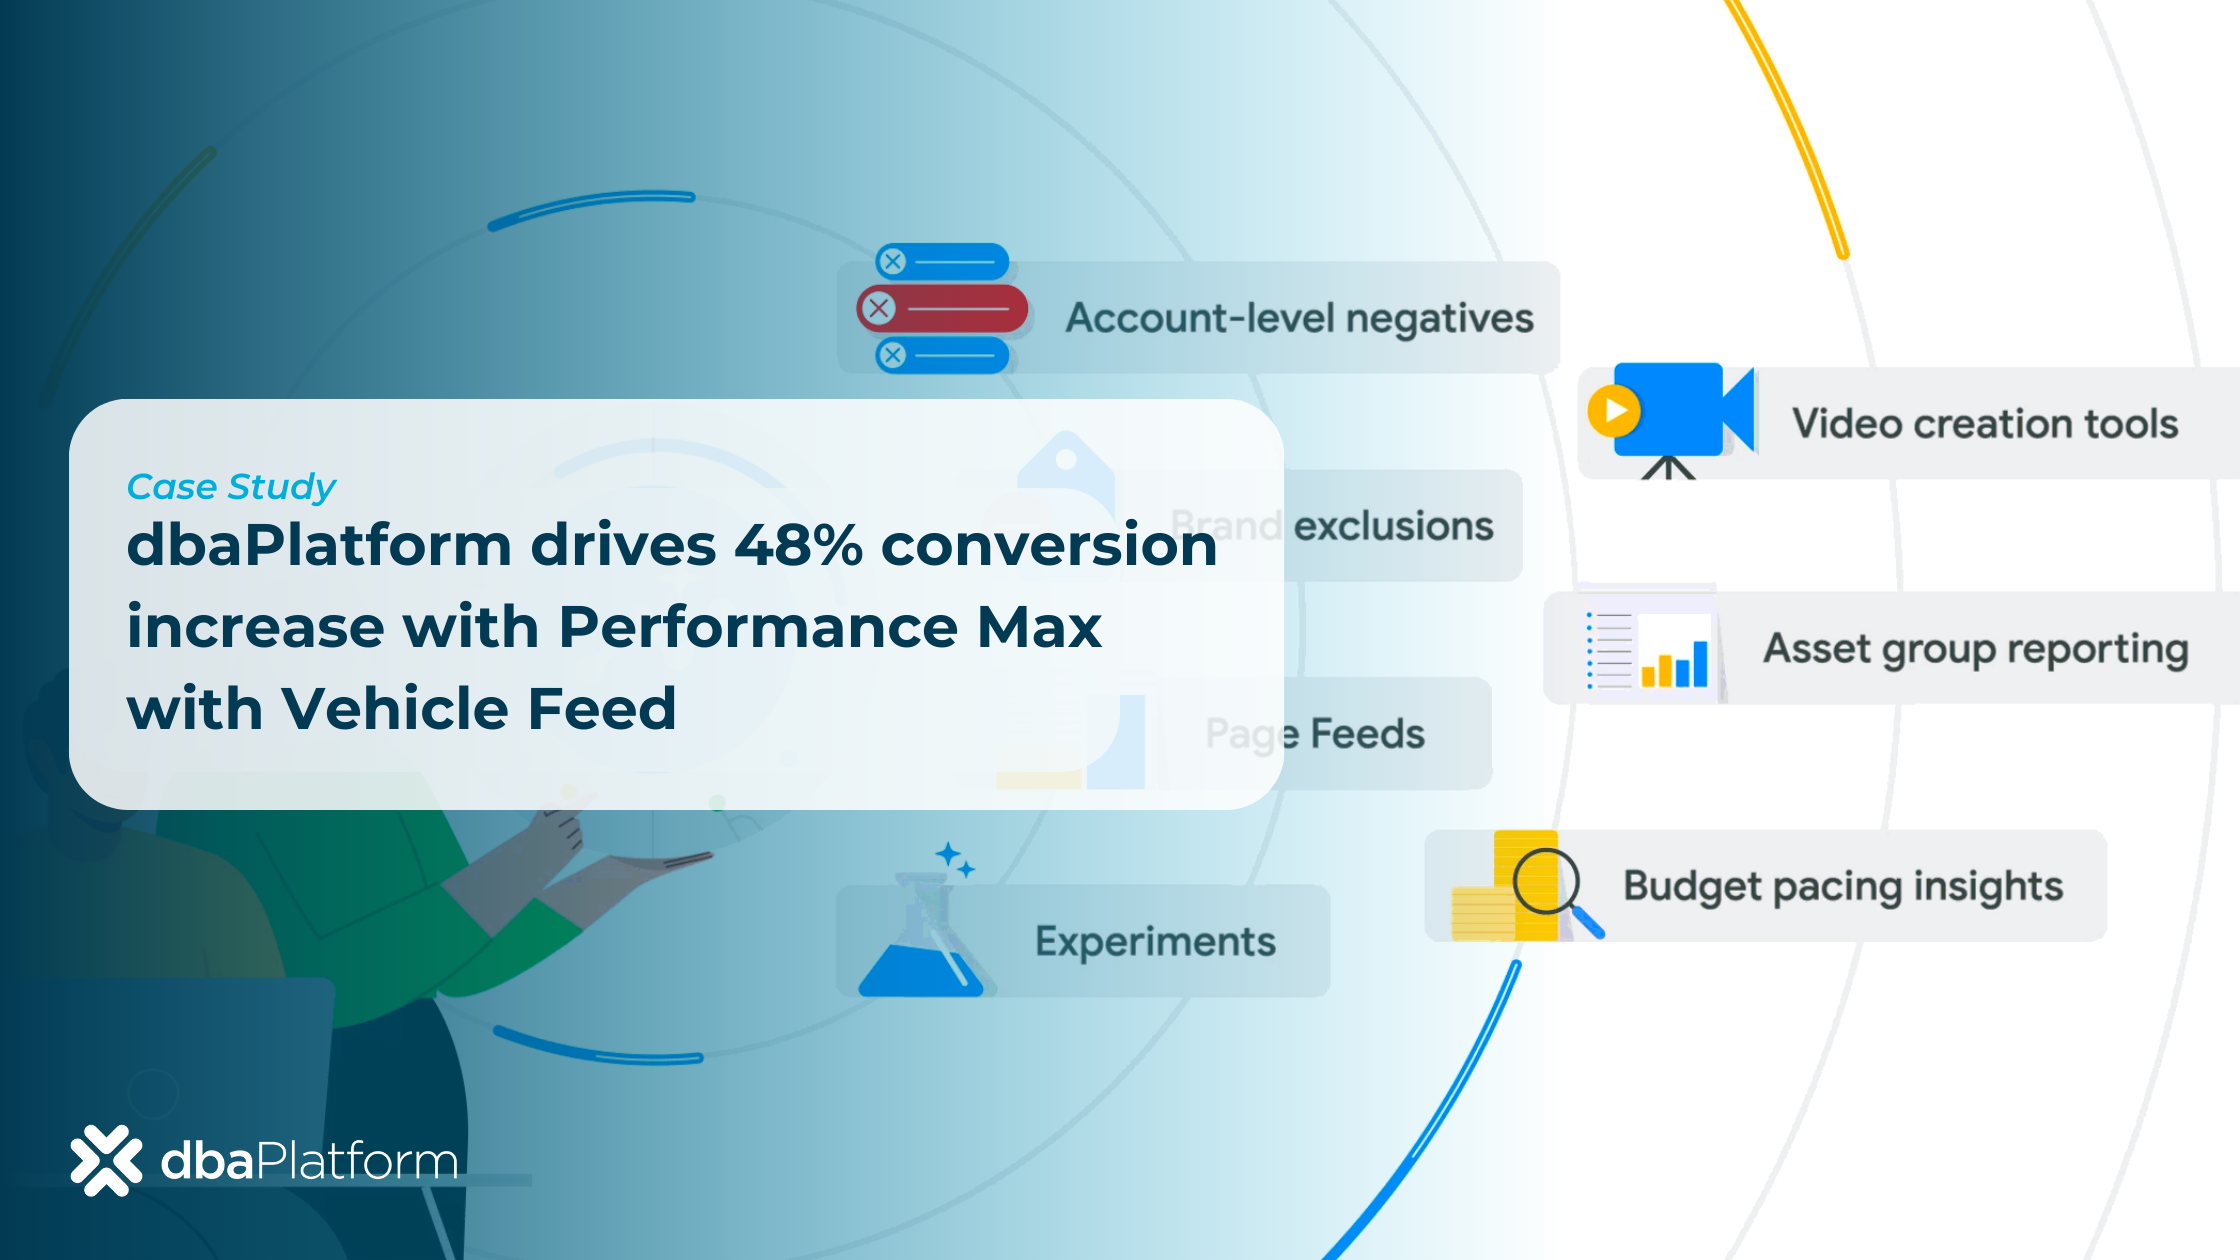 dbaPlatform boosts Google Ad conversions with Performance Max with Vehicle Feed campaigns